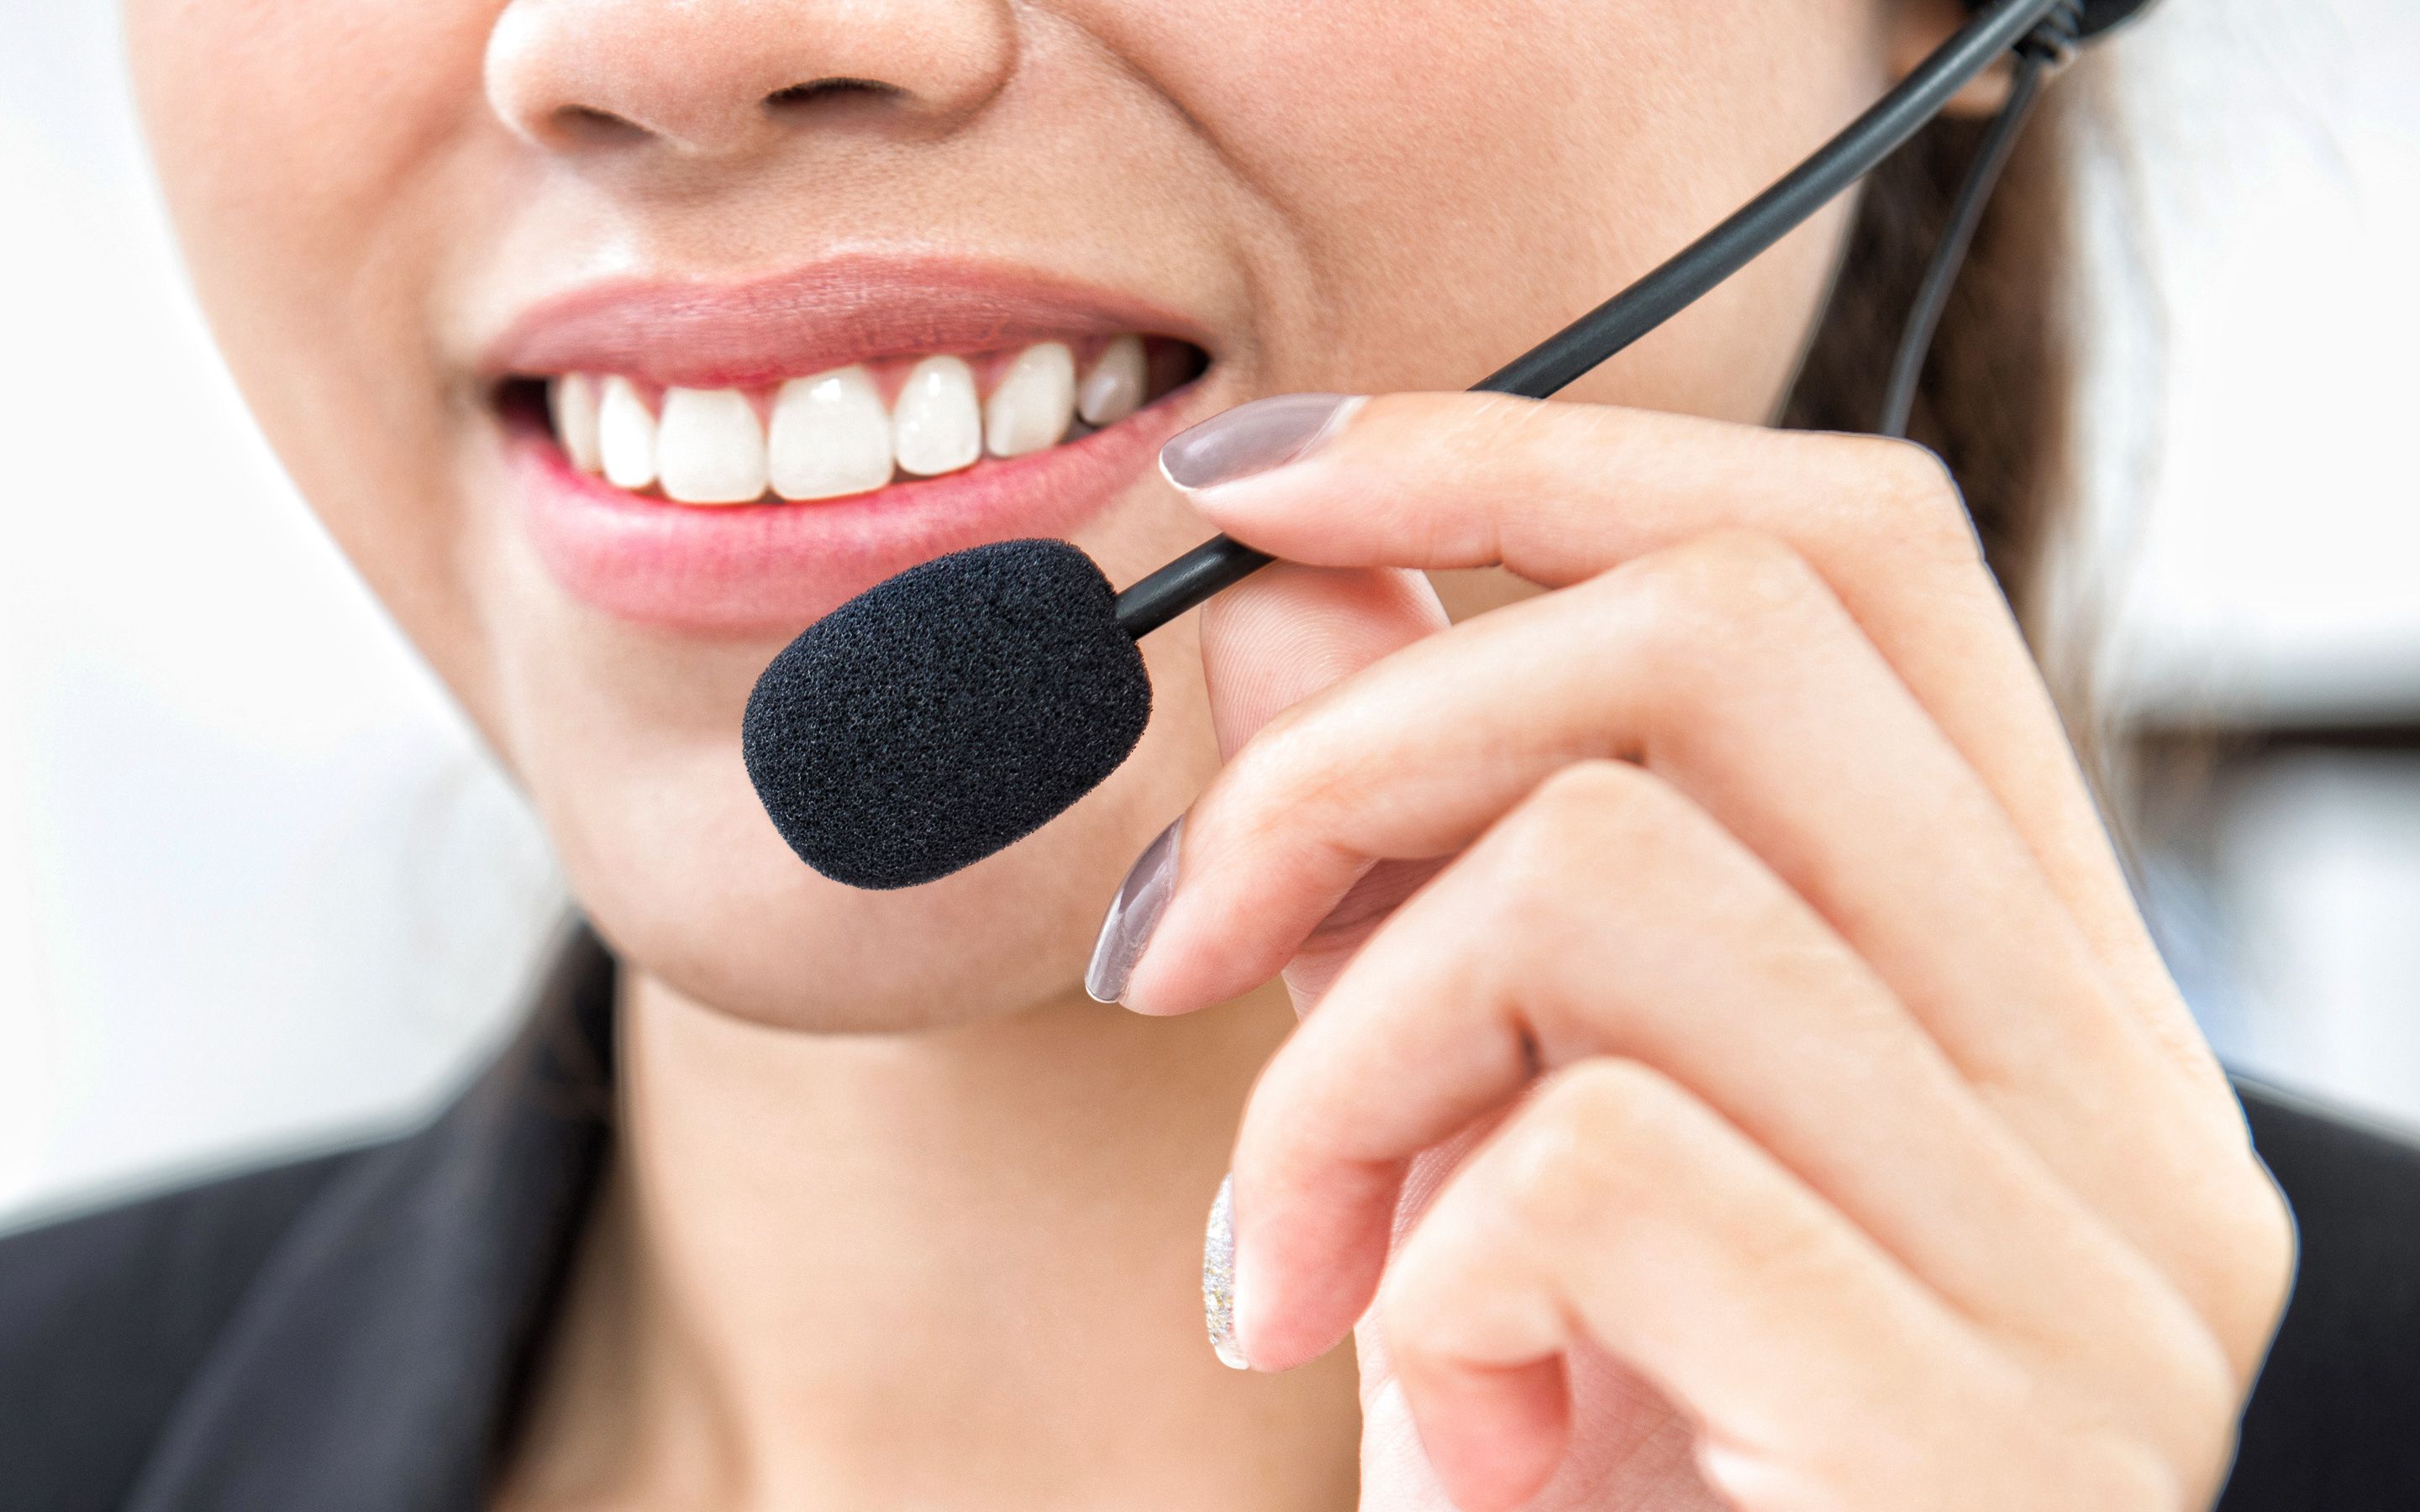 Download wallpaper Call center, woman with a microphone, Support